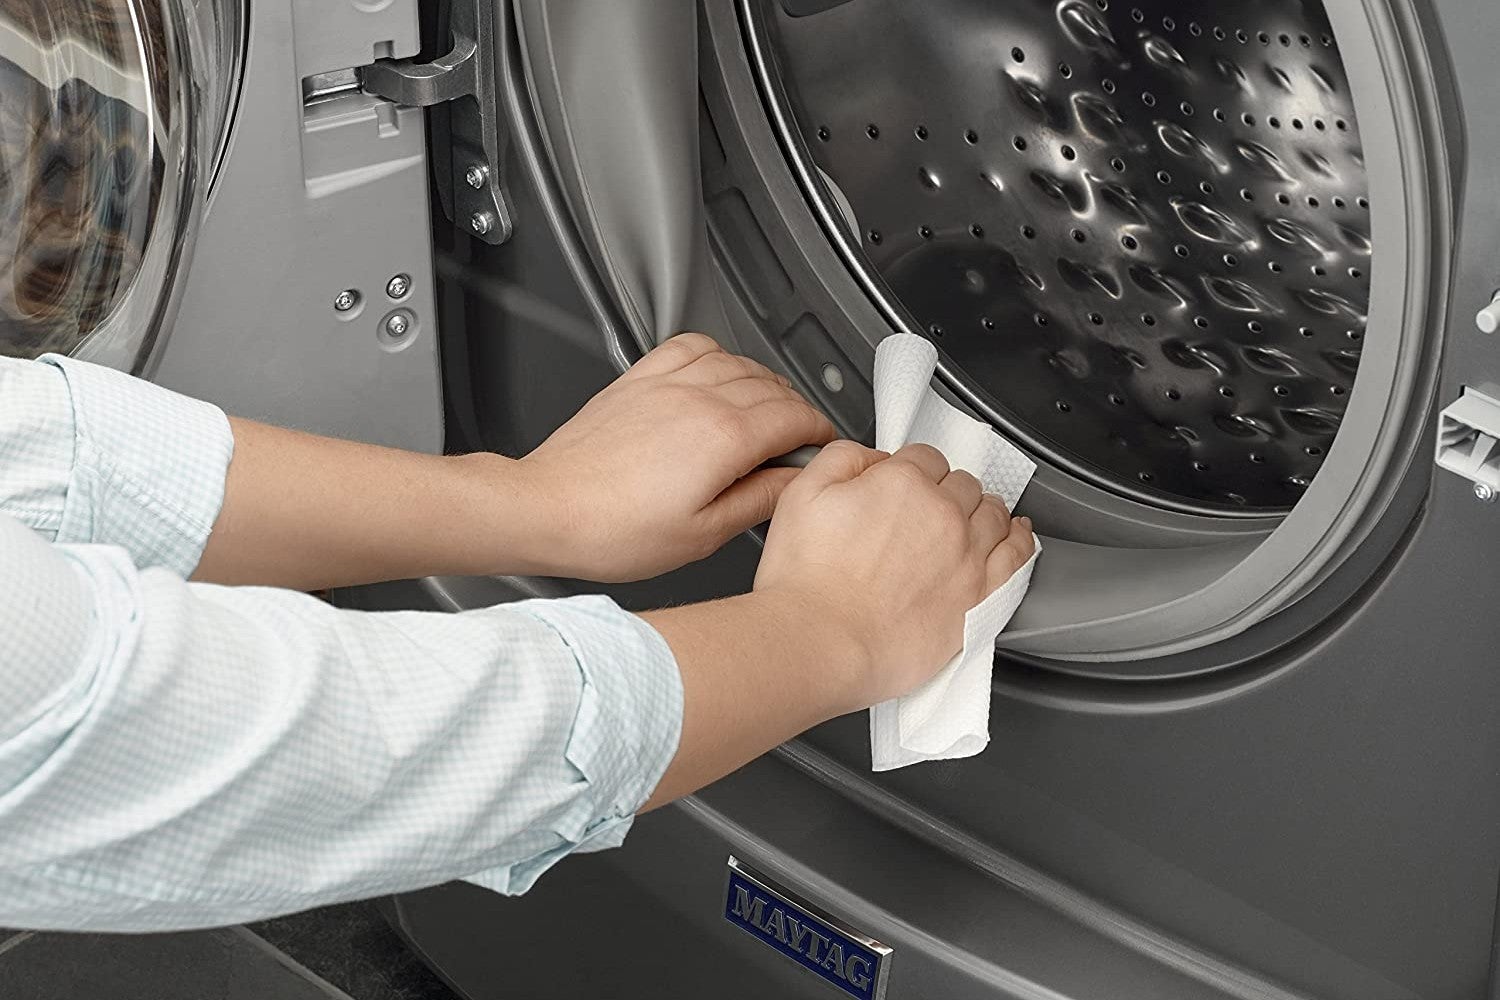 How to Clean an HE Washer